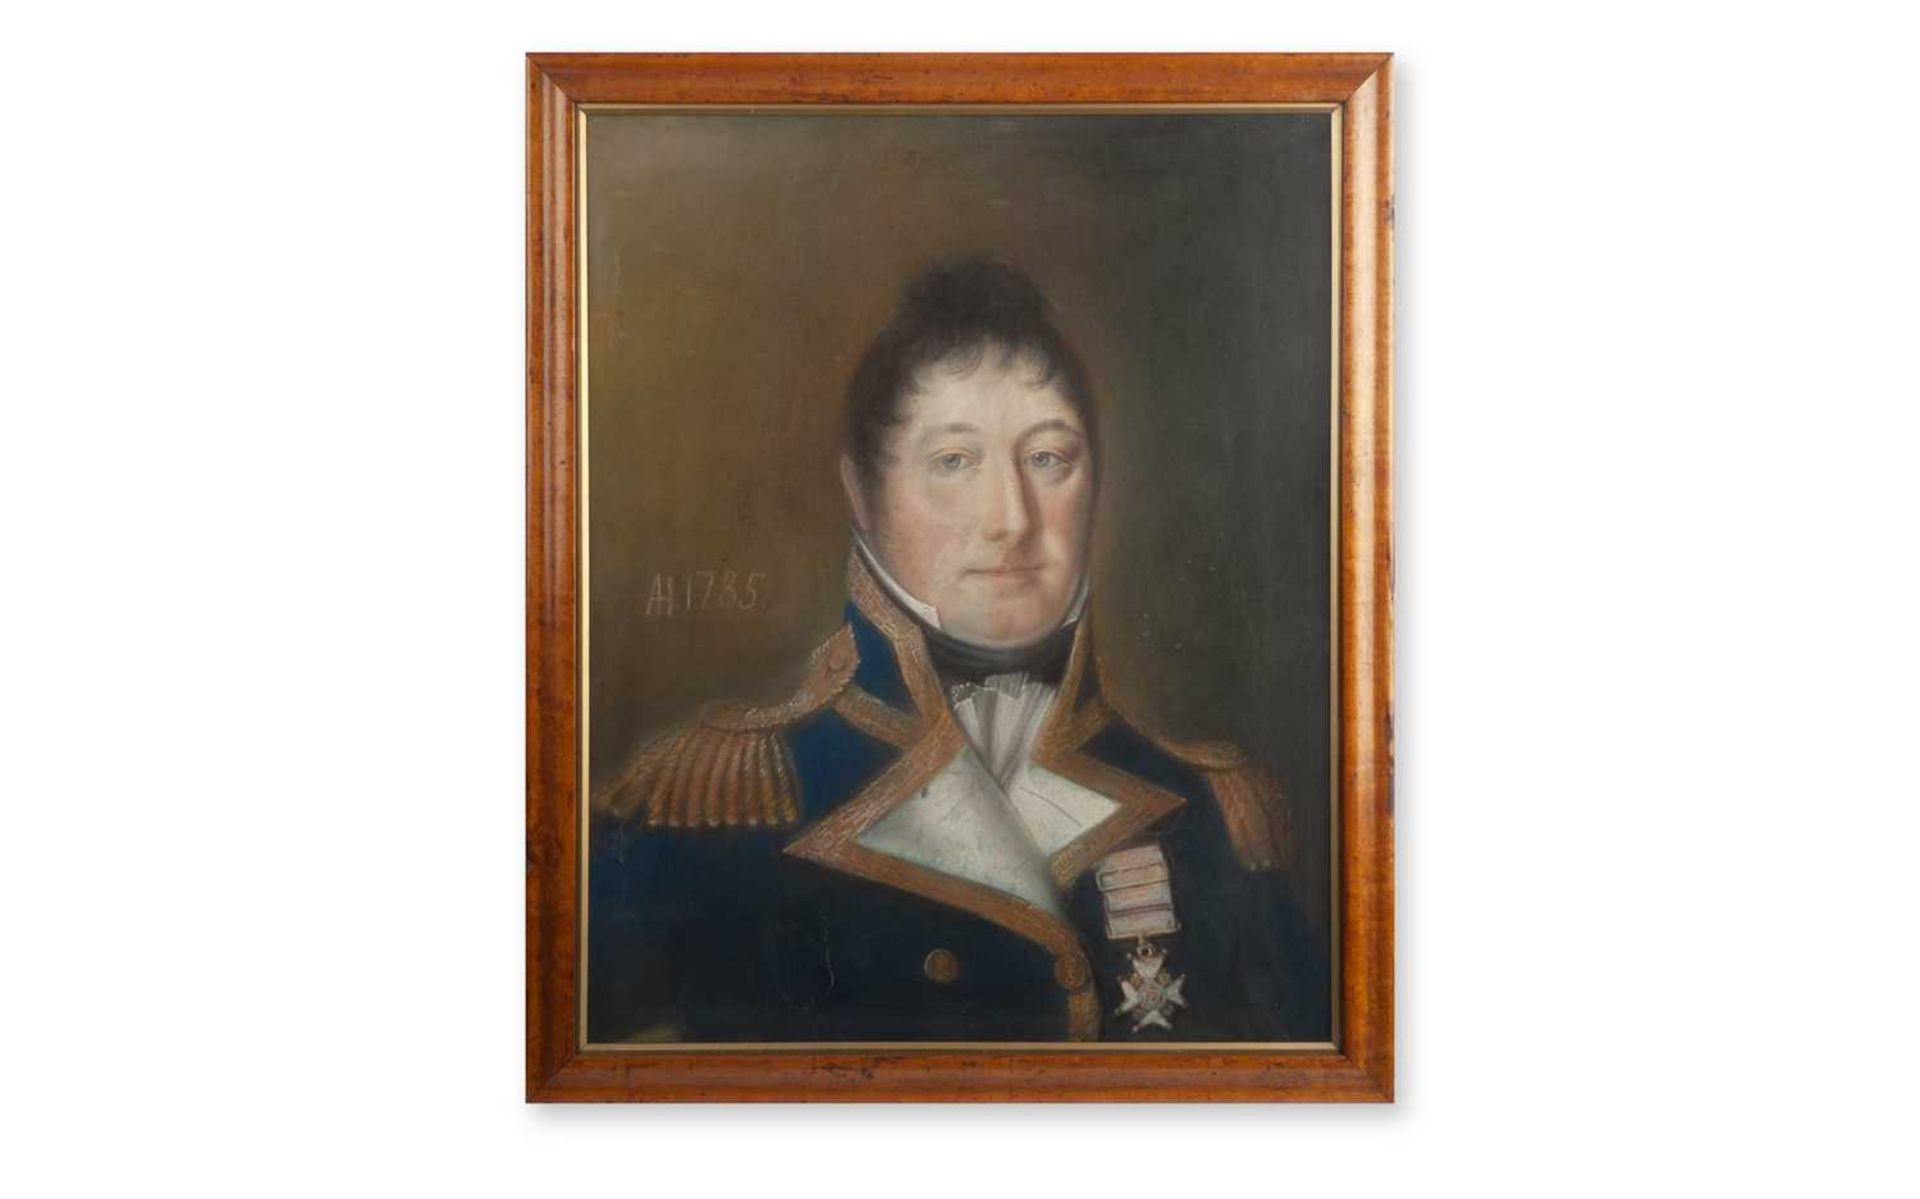 A LATE 18TH CENTURY PASTEL PORTRAIT OF A MILITARY OFFICER